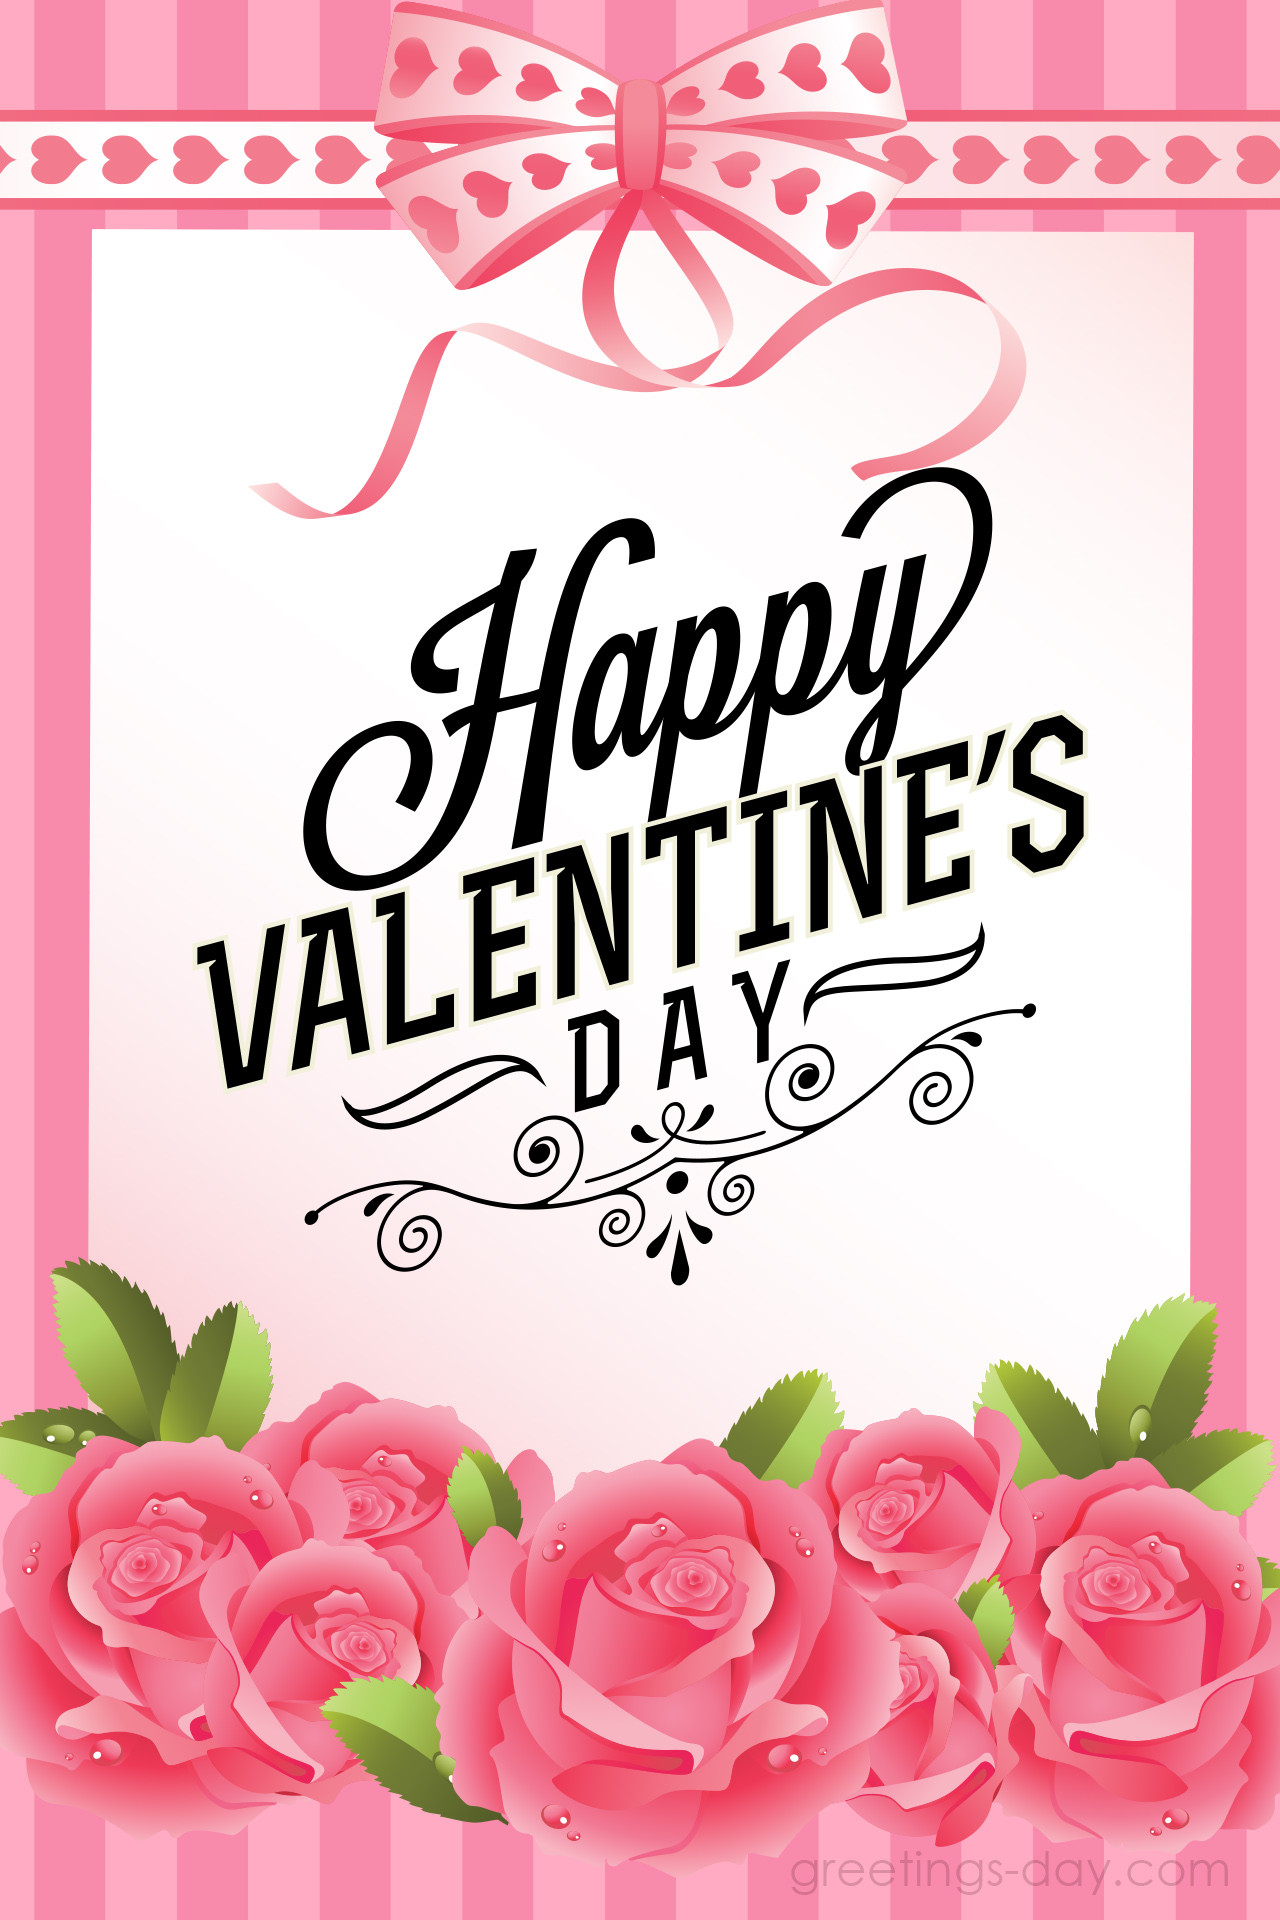 Valentines Day Quotes for Family Fresh Valentine S Day Quotes and Flowers for Friends and Family